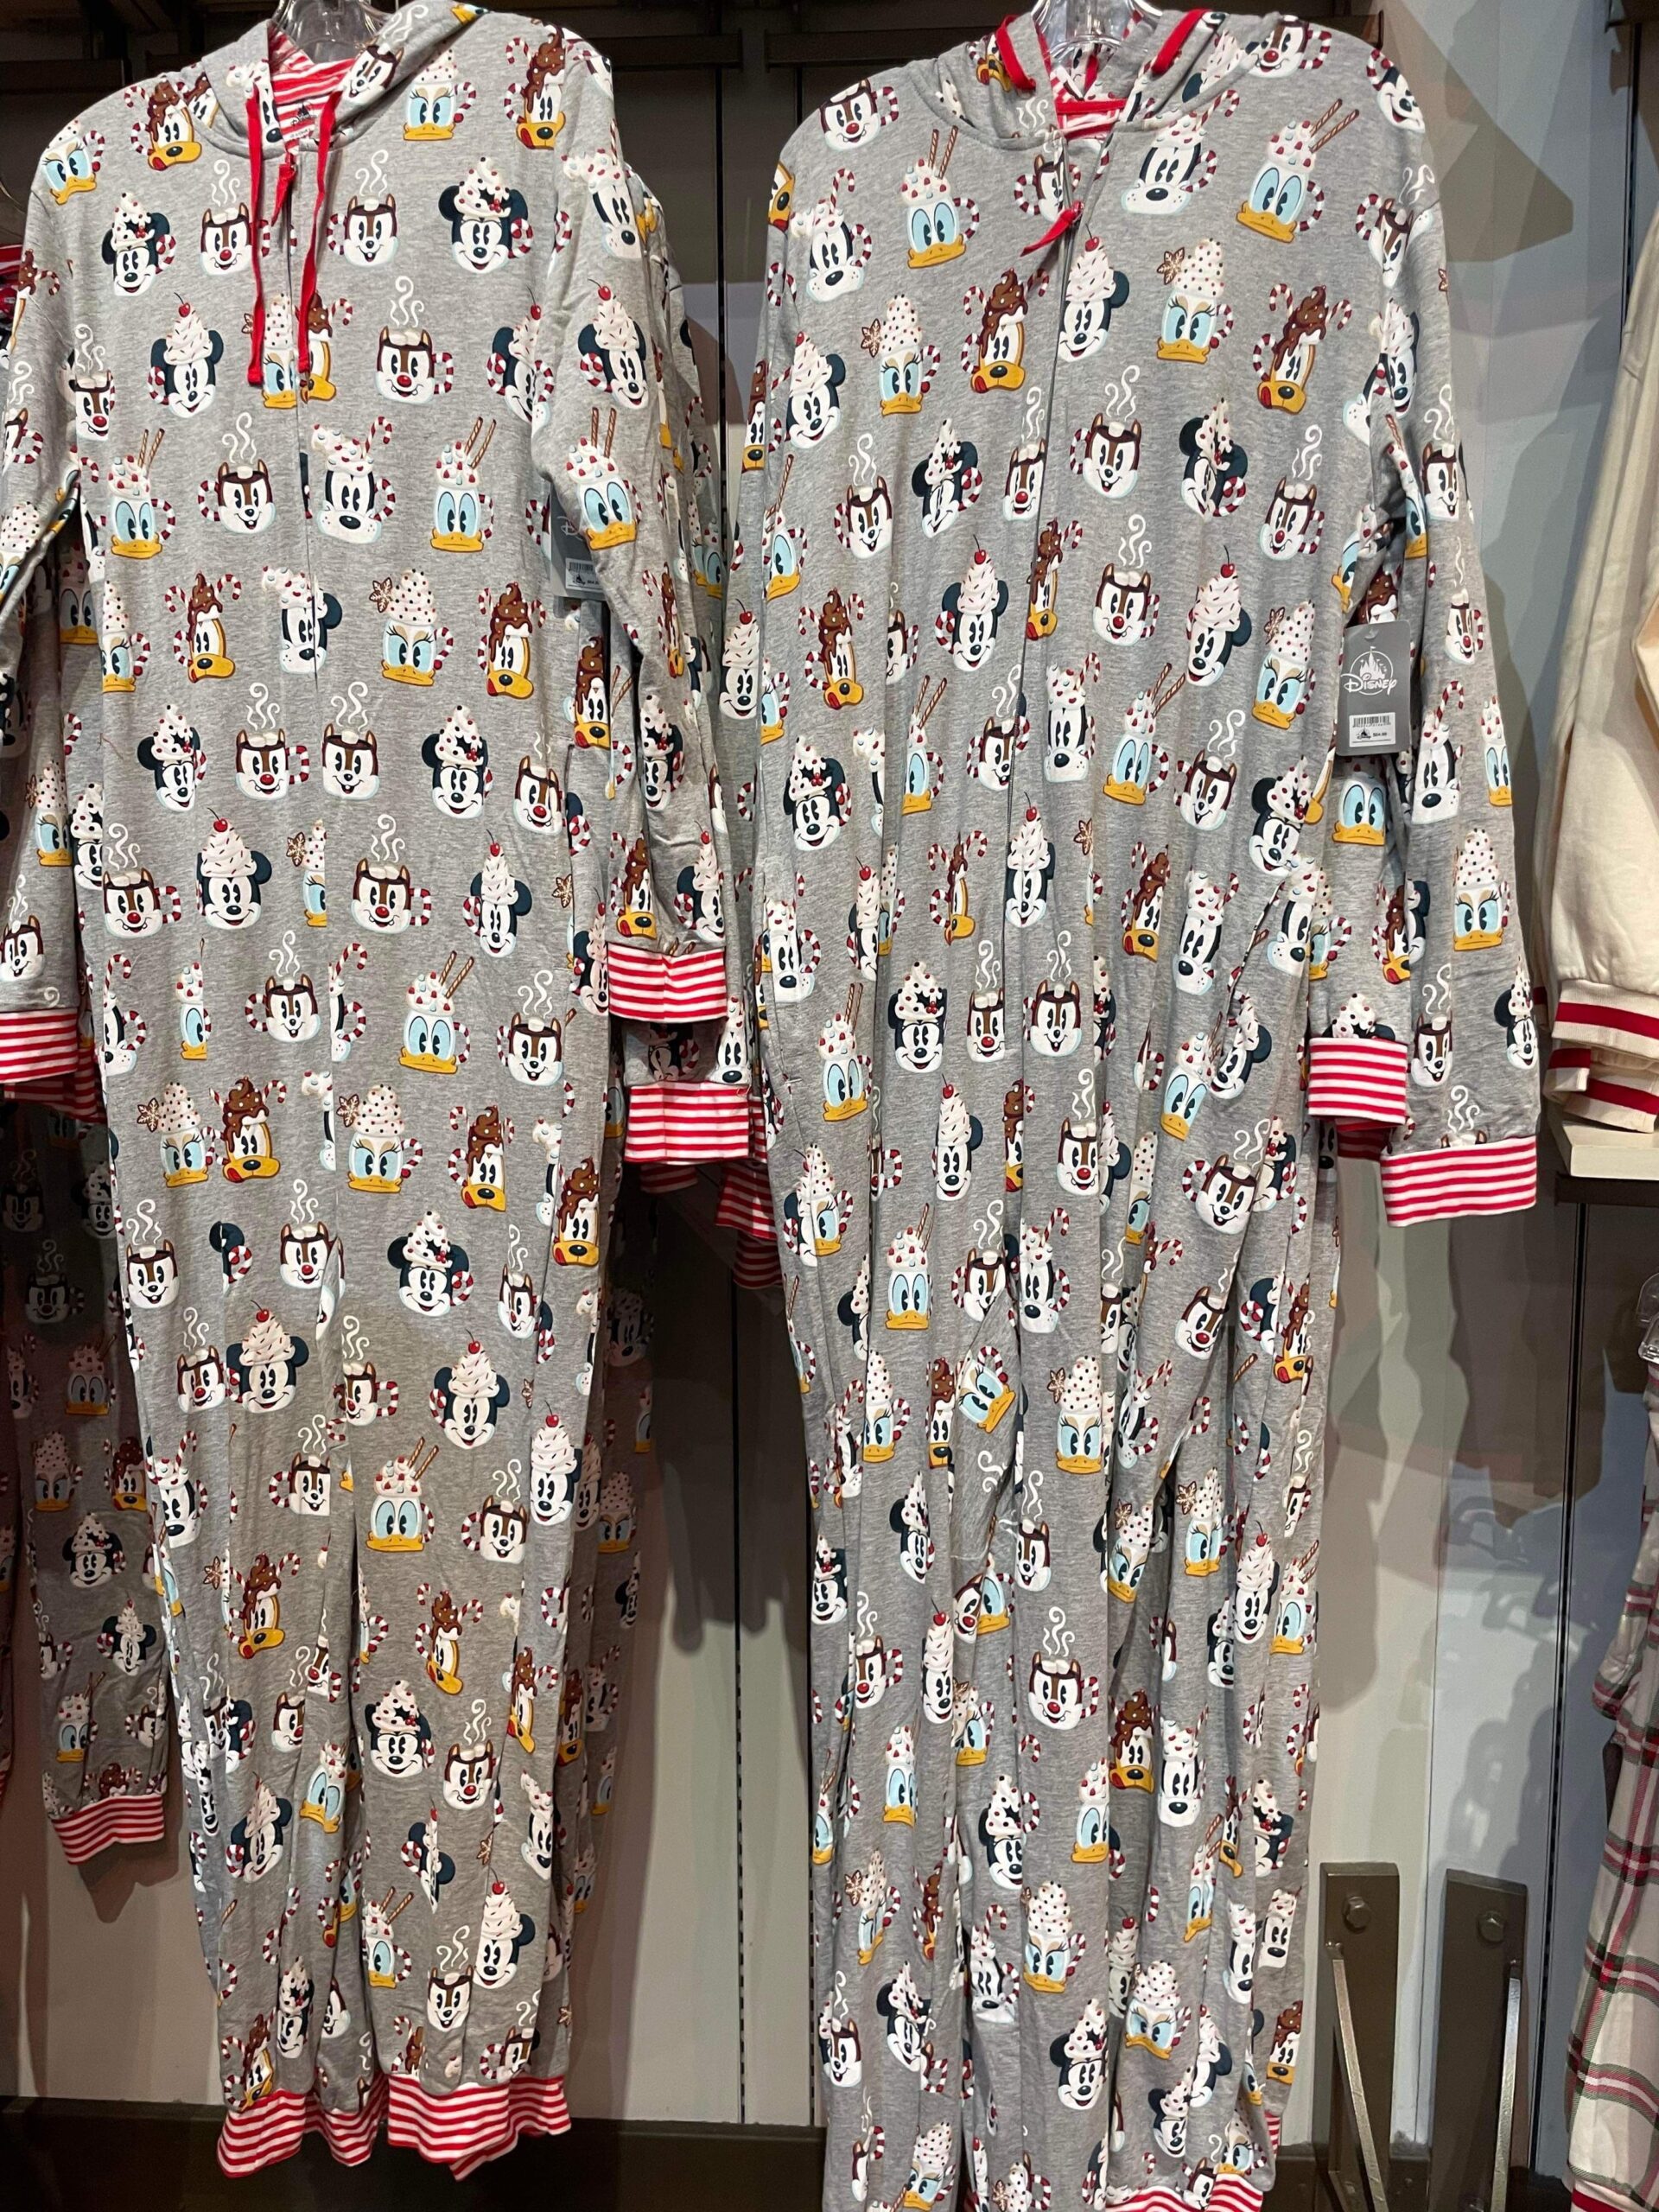 Festive New Holiday Apparel Arrives at Disney Springs!